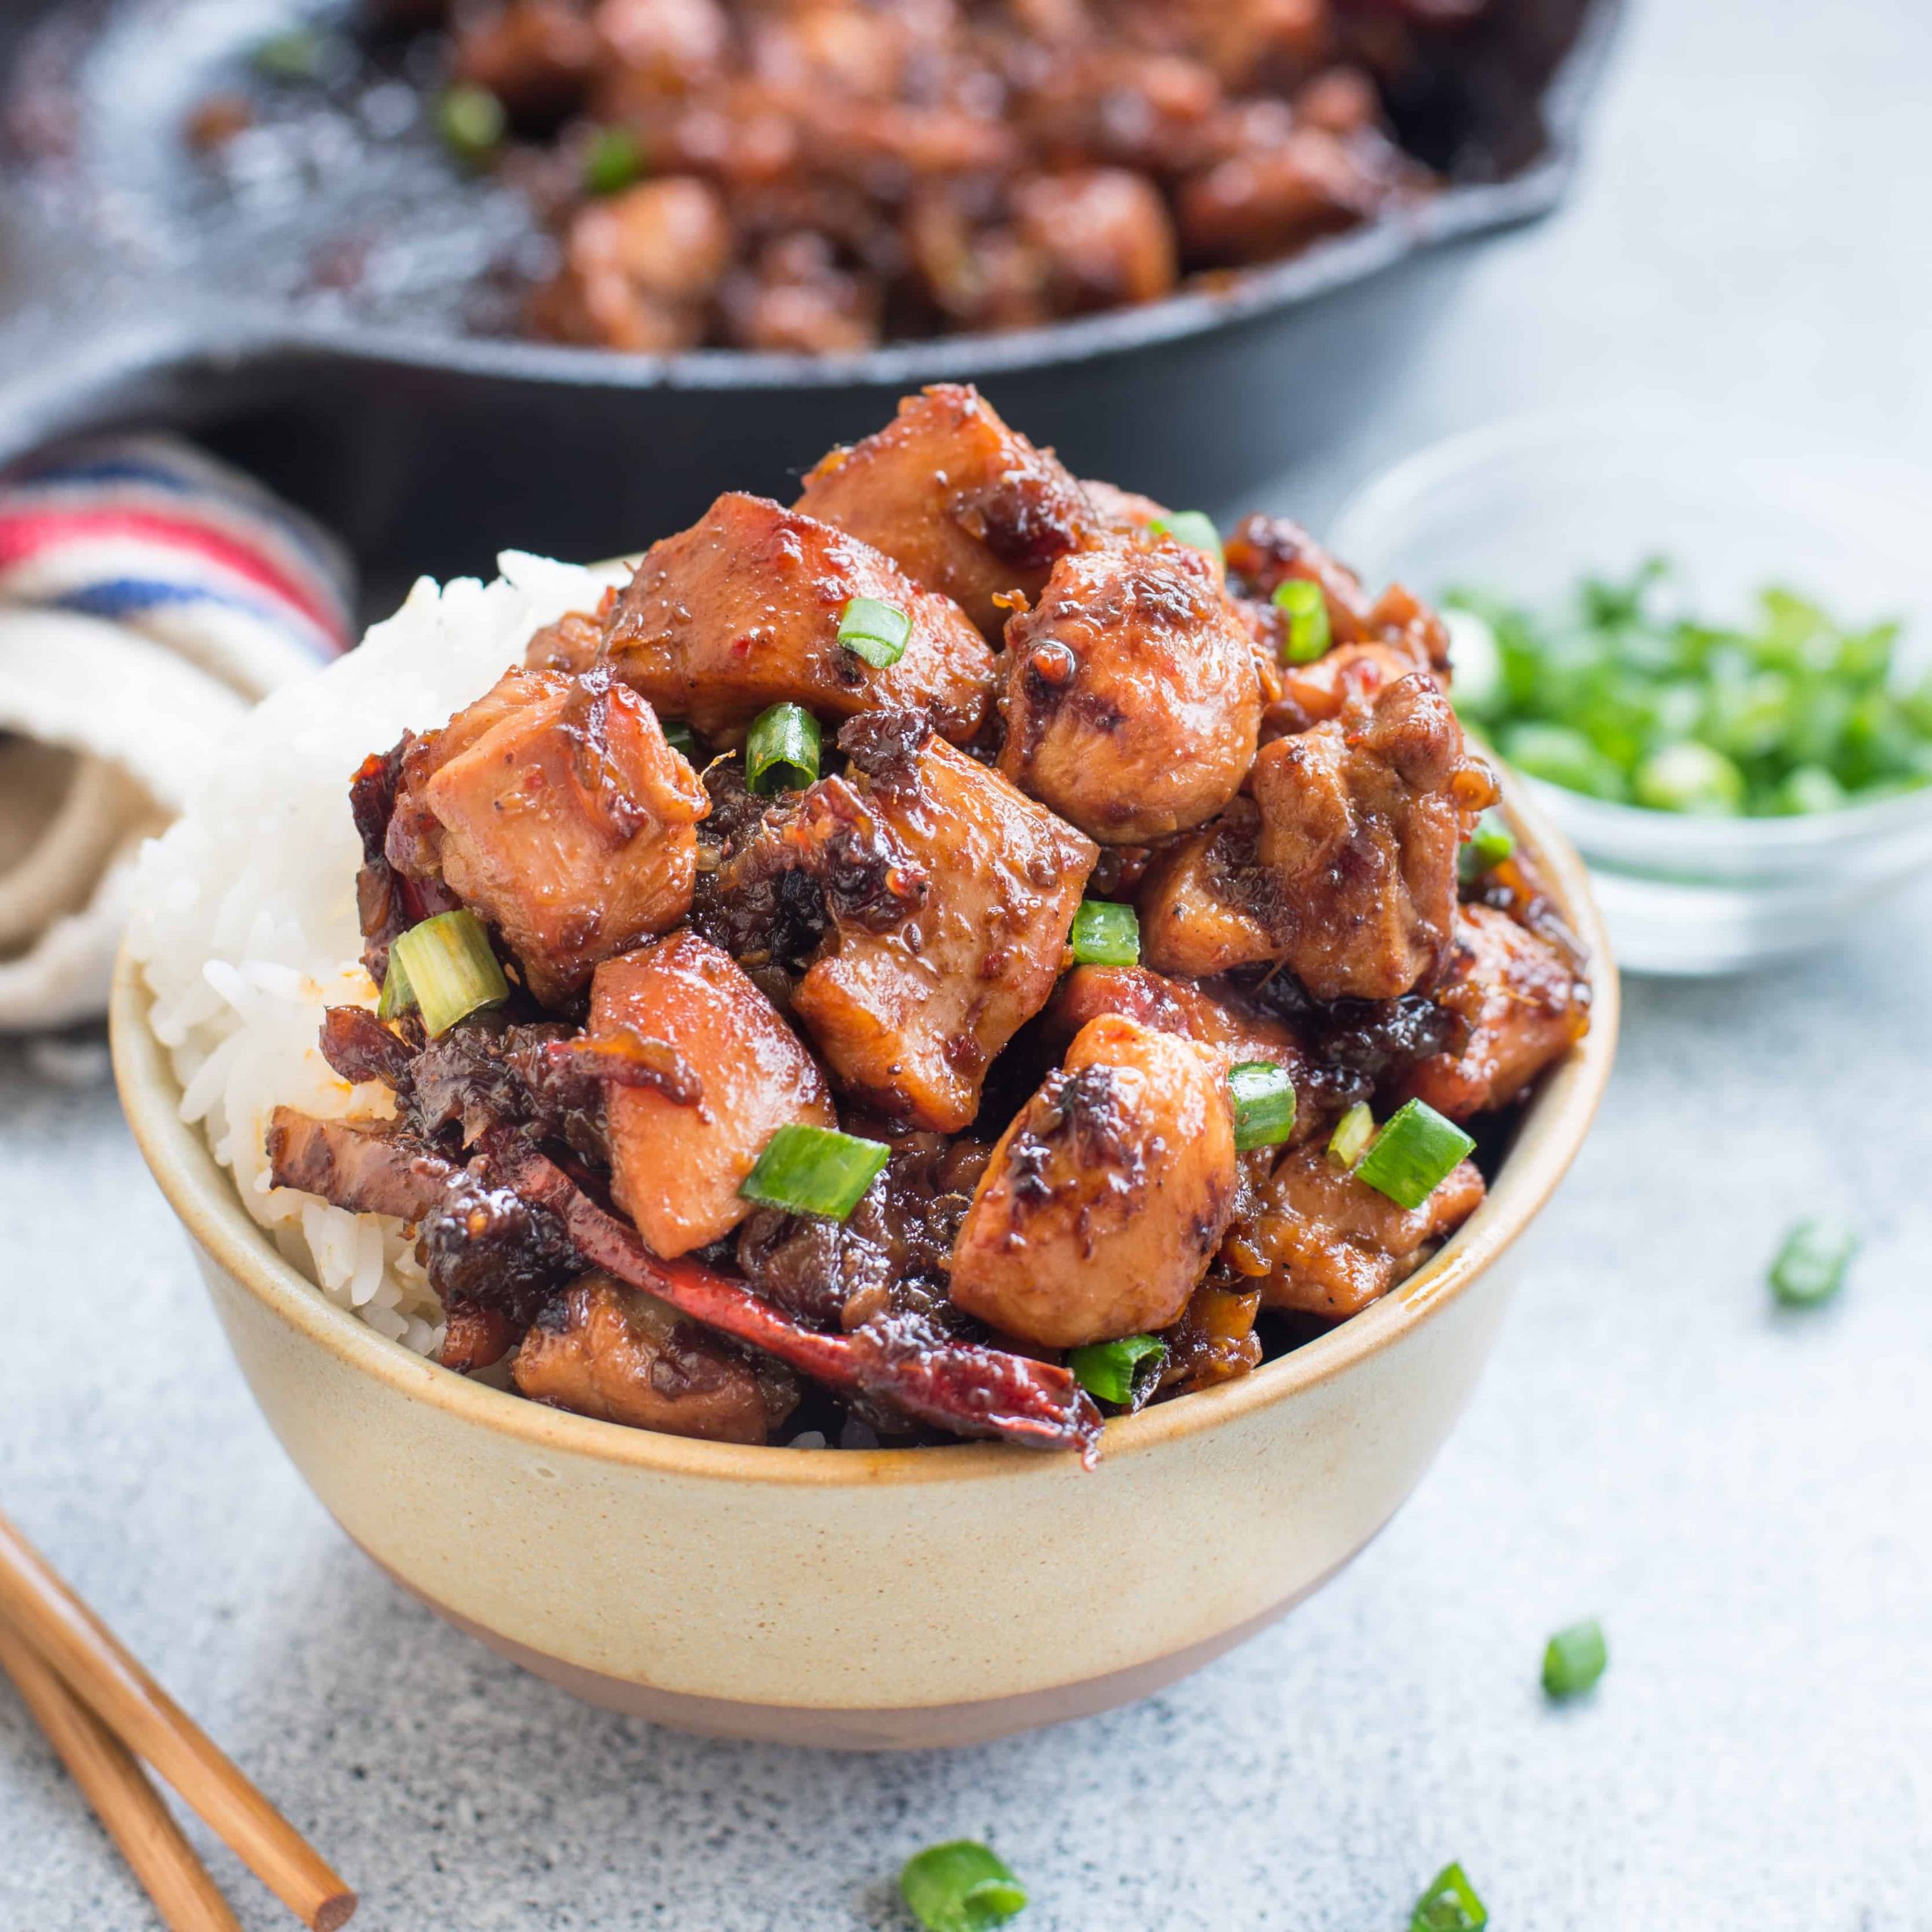 Recipes Using Chinese Five Spice
 Chinese Five Spice Ginger Chicken The flavours of kitchen